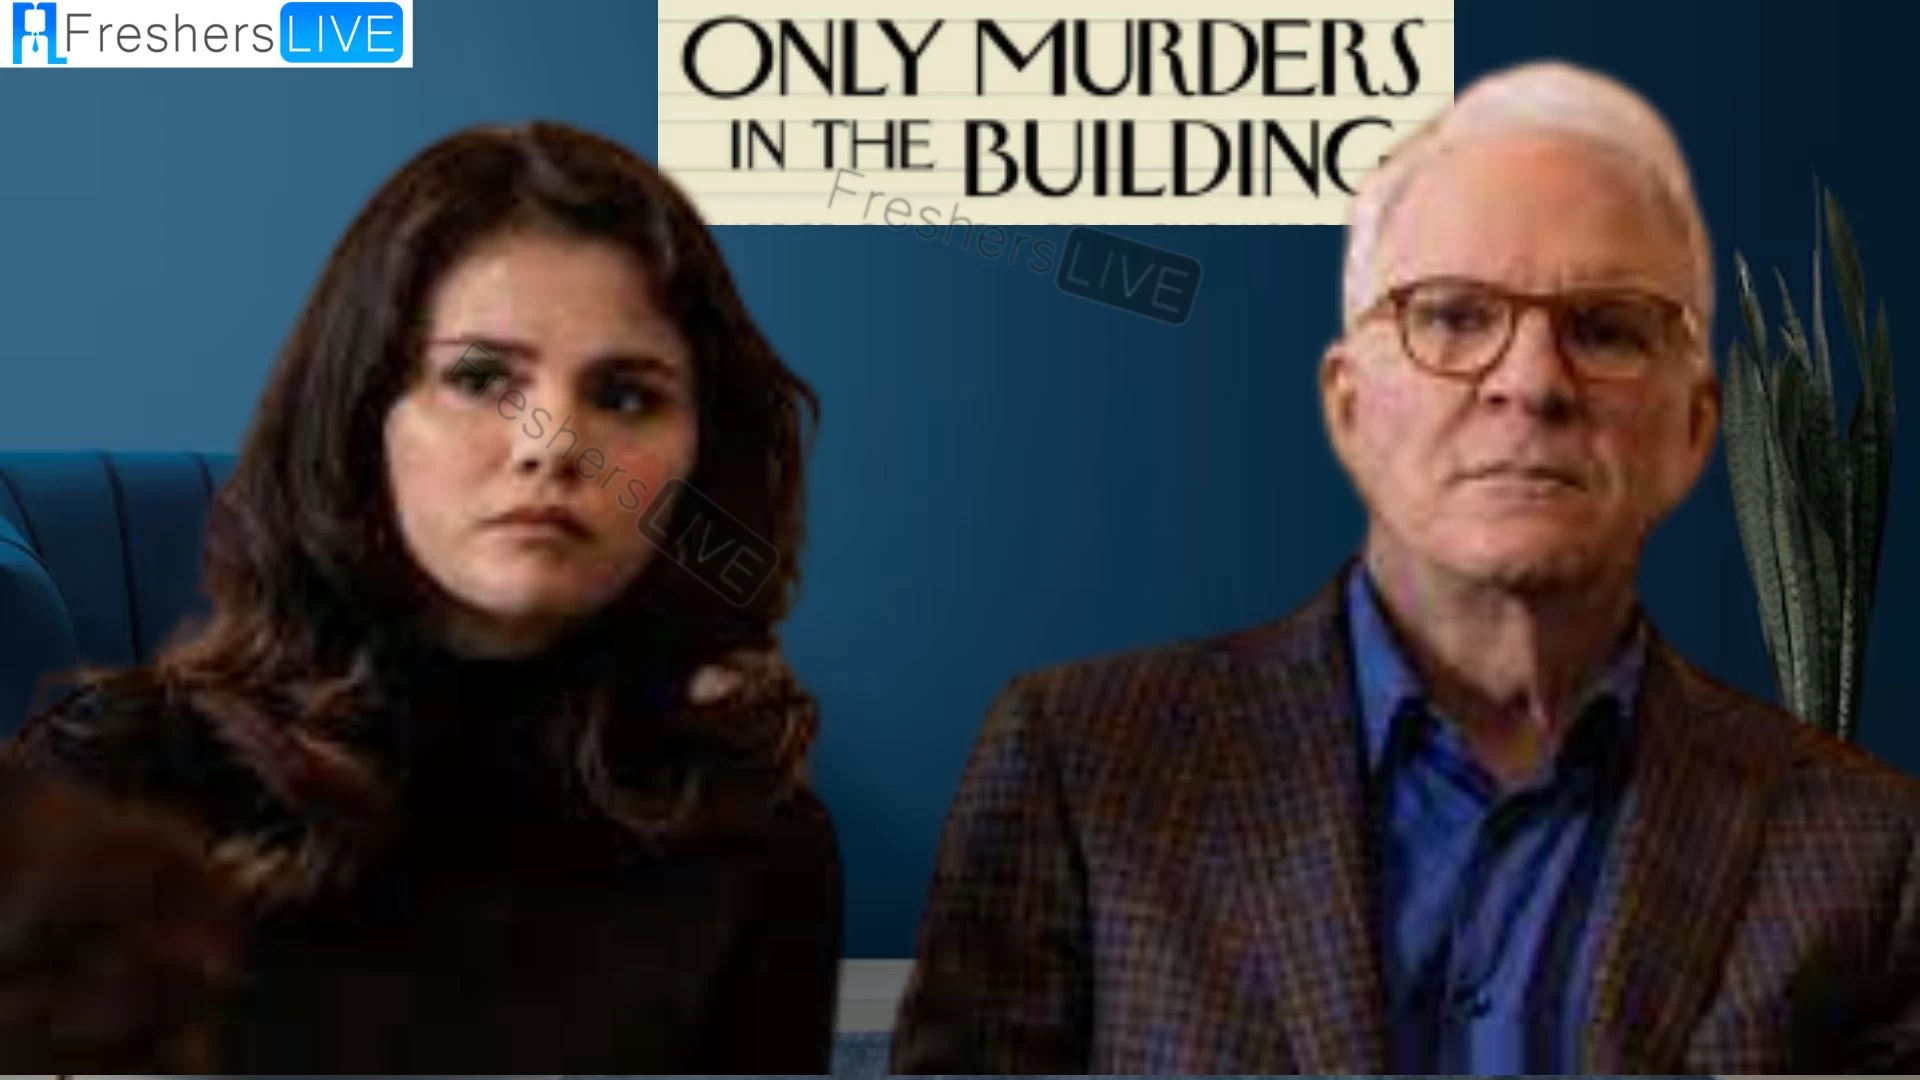 Only Murders In The Building Season 3 Episode 9 Ending Explained, Release Date, Plot, Cast, Where to Watch and more